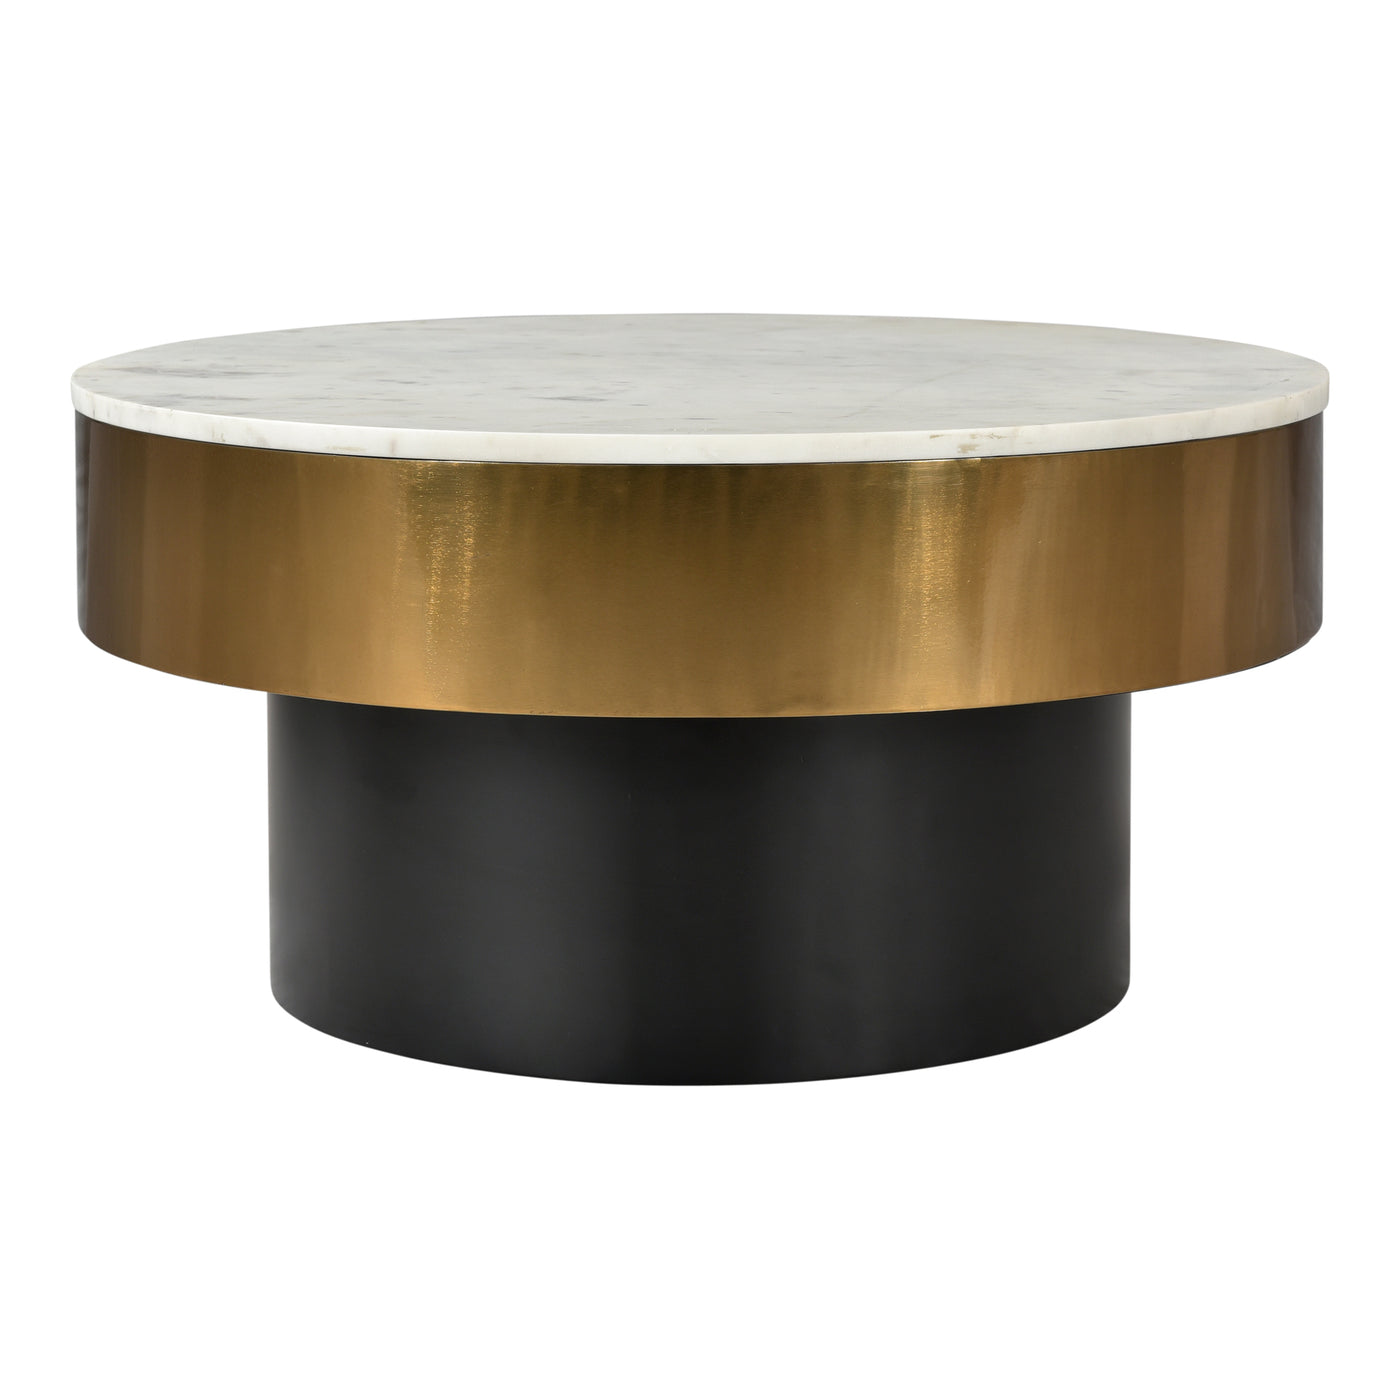 Bring art-deco in your sophisticated space with the Dado Coffee Table. It embodies the true meaning of a stunning centerpi...